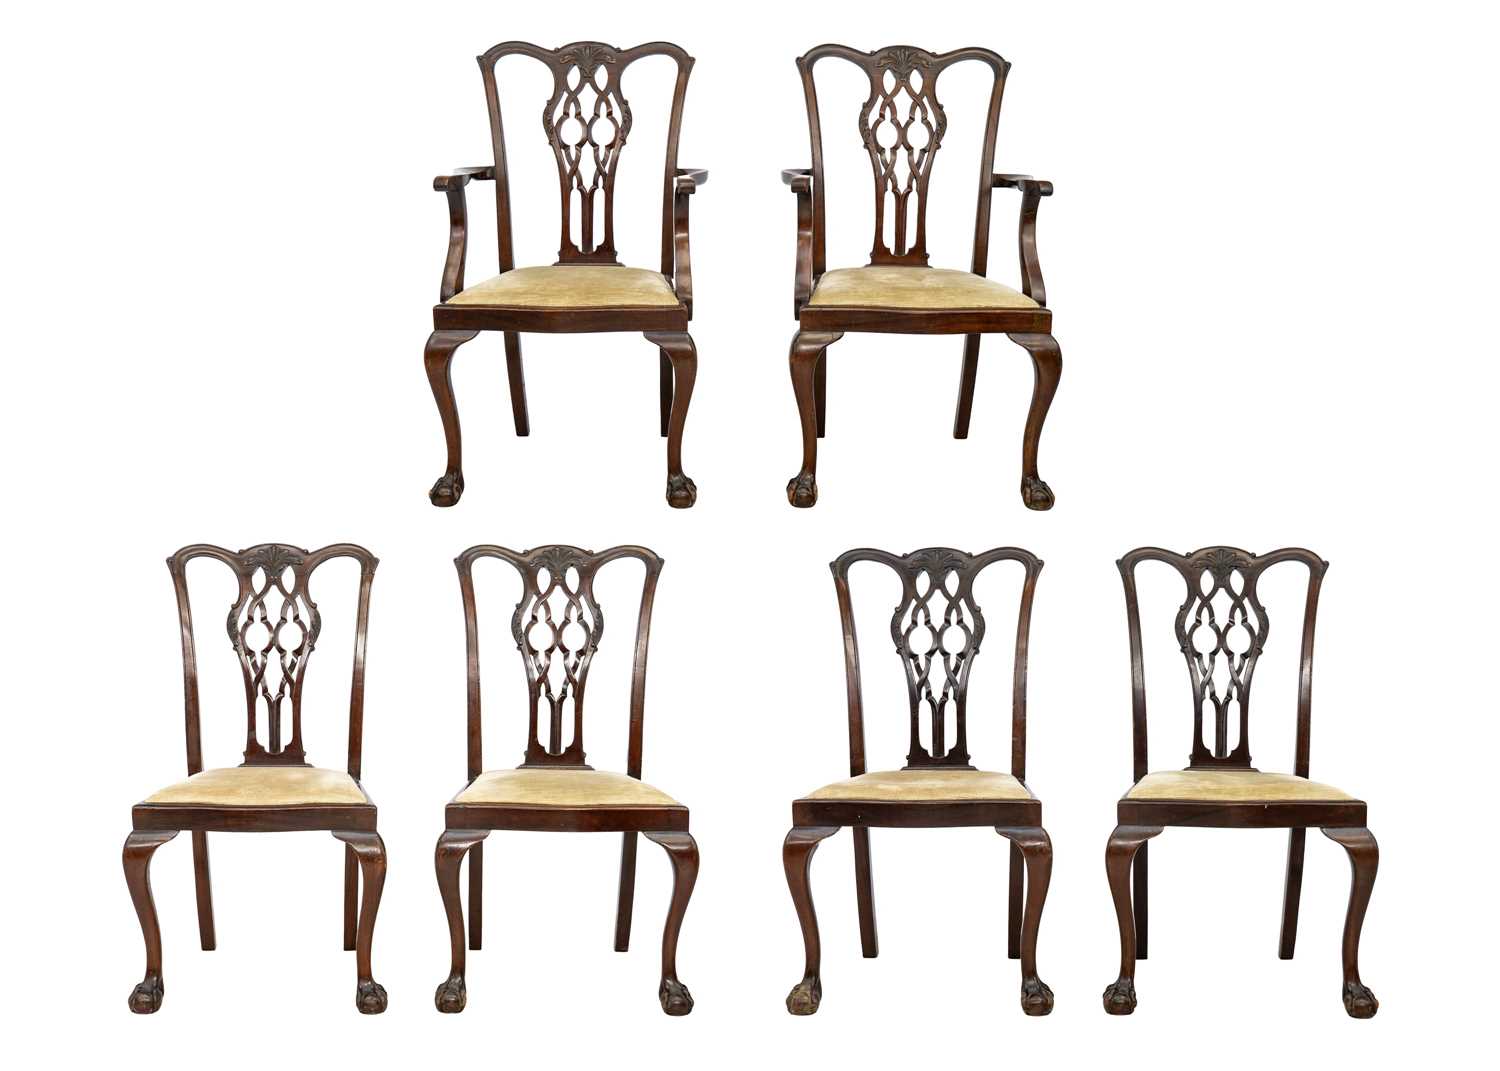 A set of six Chippendale design mahogany dining chairs.